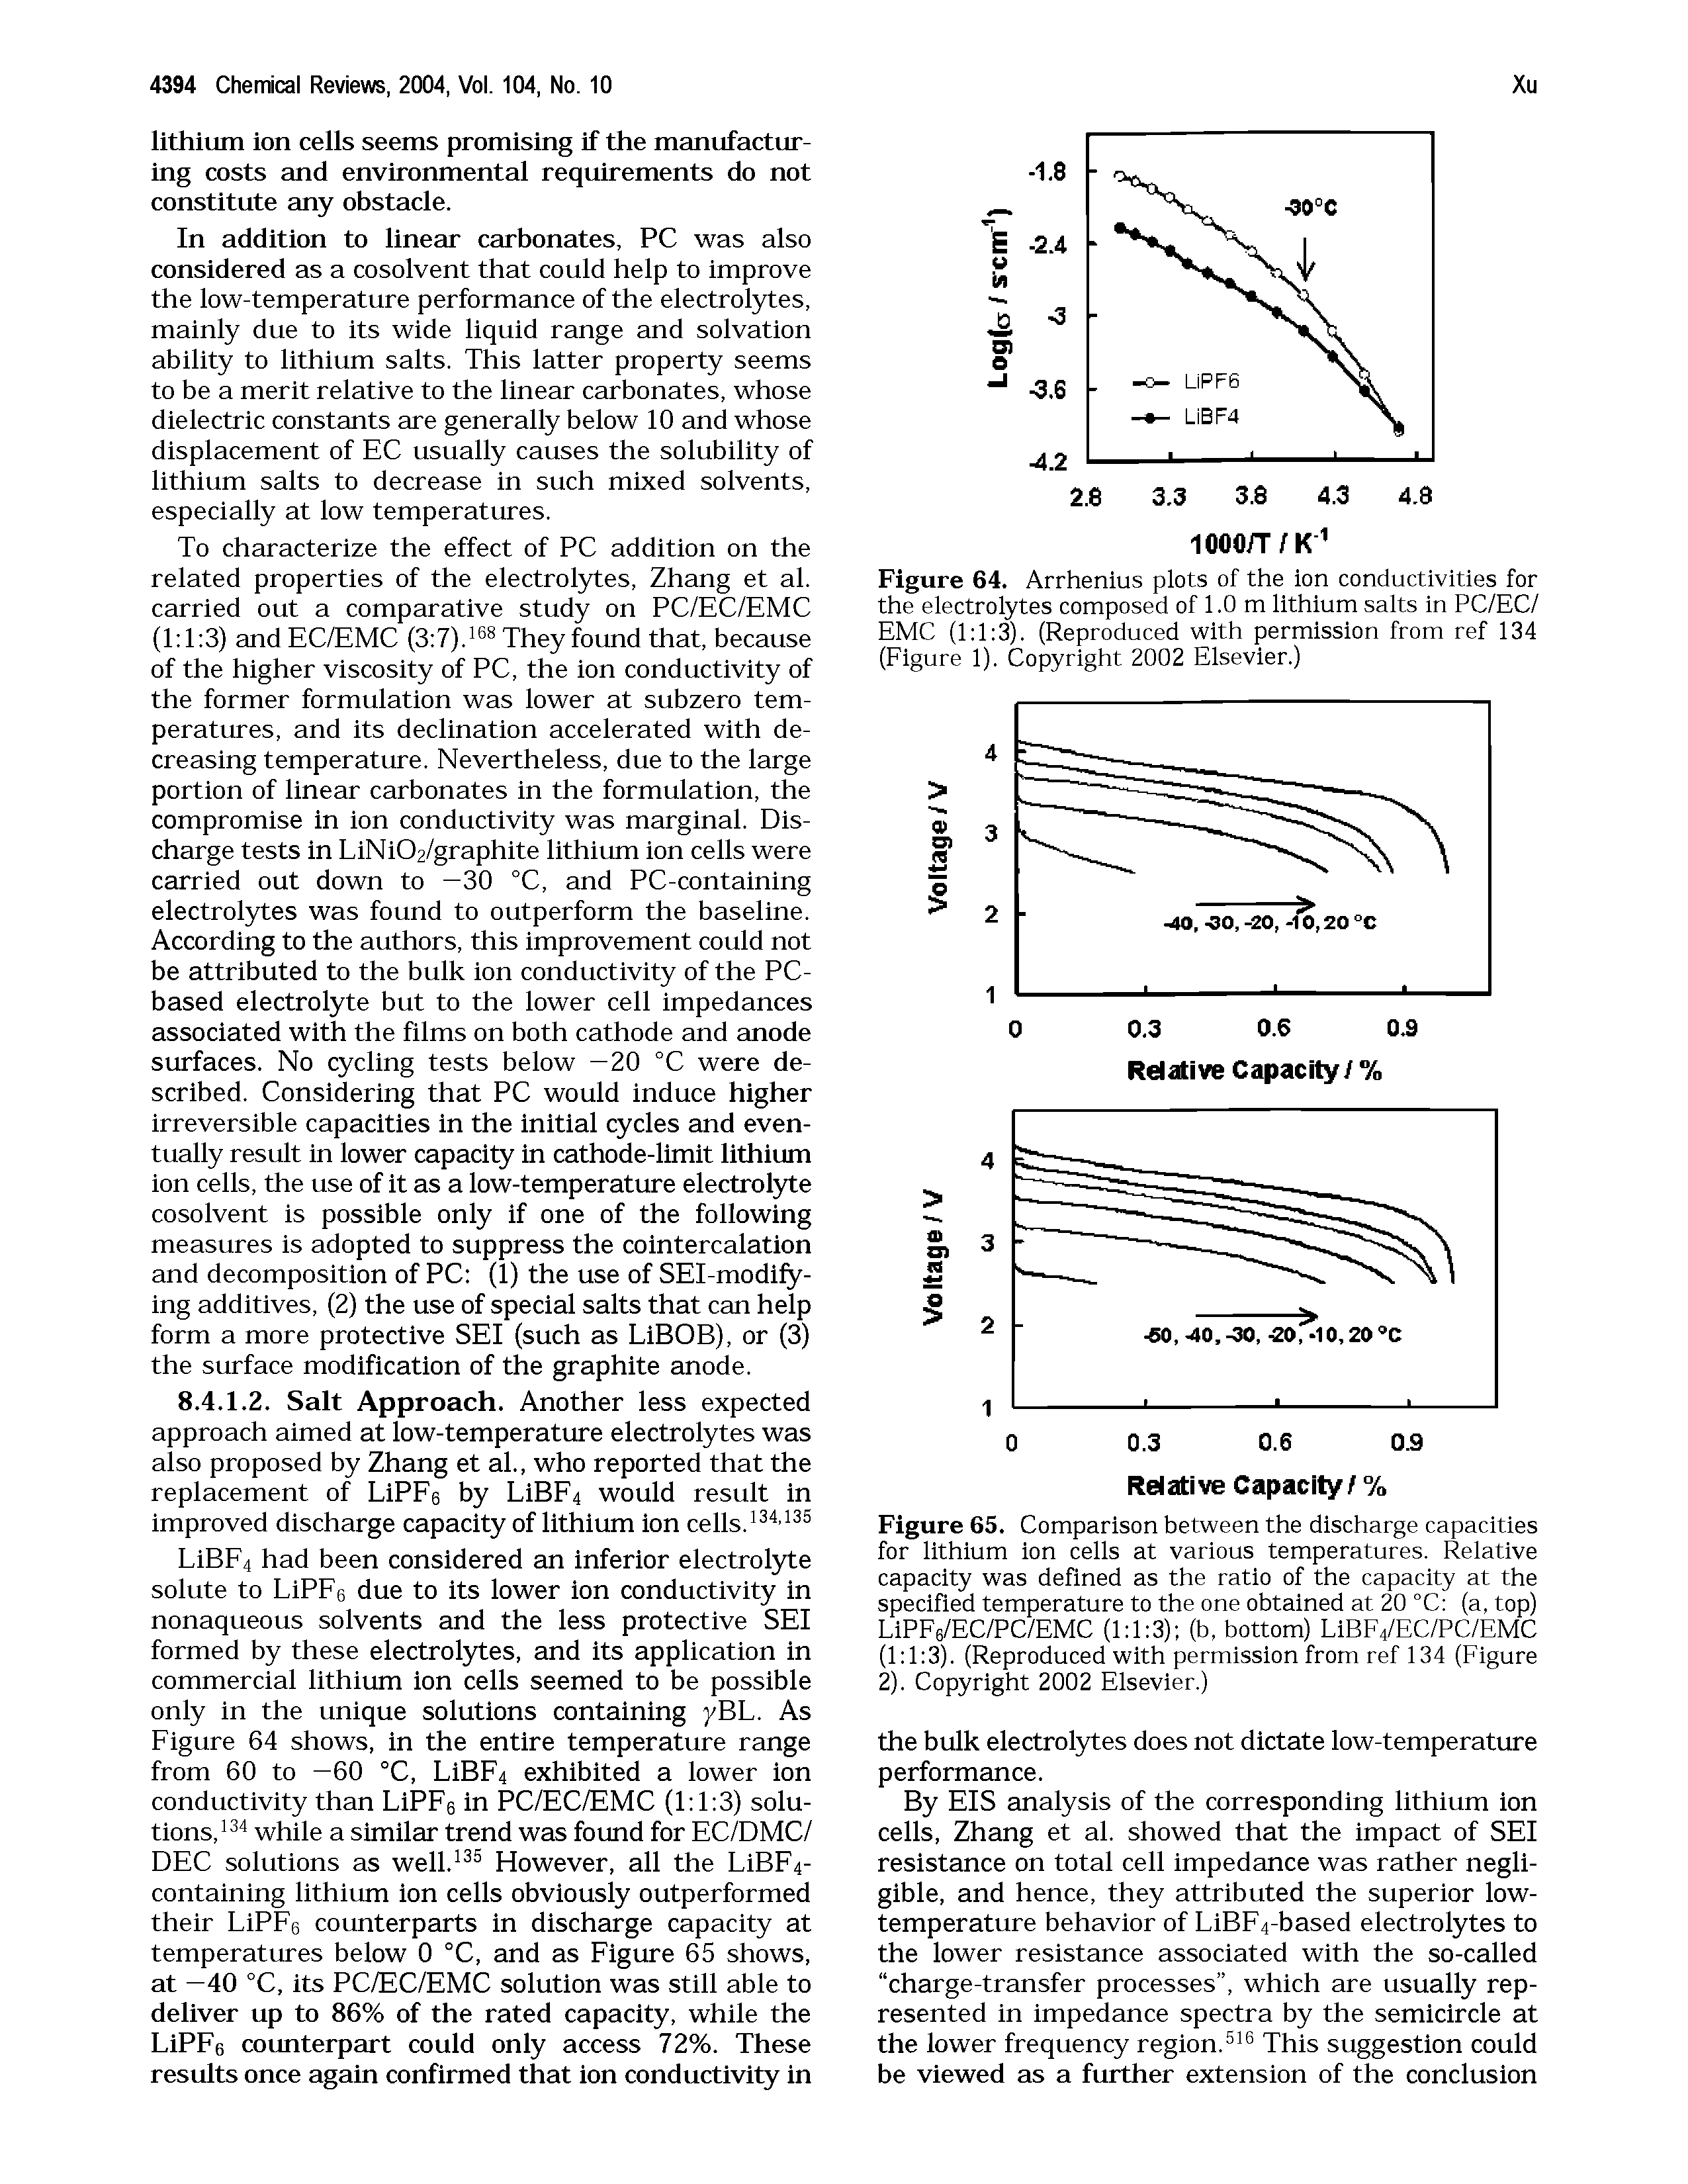 Figure 64. Arrhenius plots of the ion conductivities for the electrolytes composed of 1.0 m lithium salts in PC/EC/ EMC (1 1 3). (Reproduced with permission from ref 134 (Figure 1). Copyright 2002 Elsevier.)...